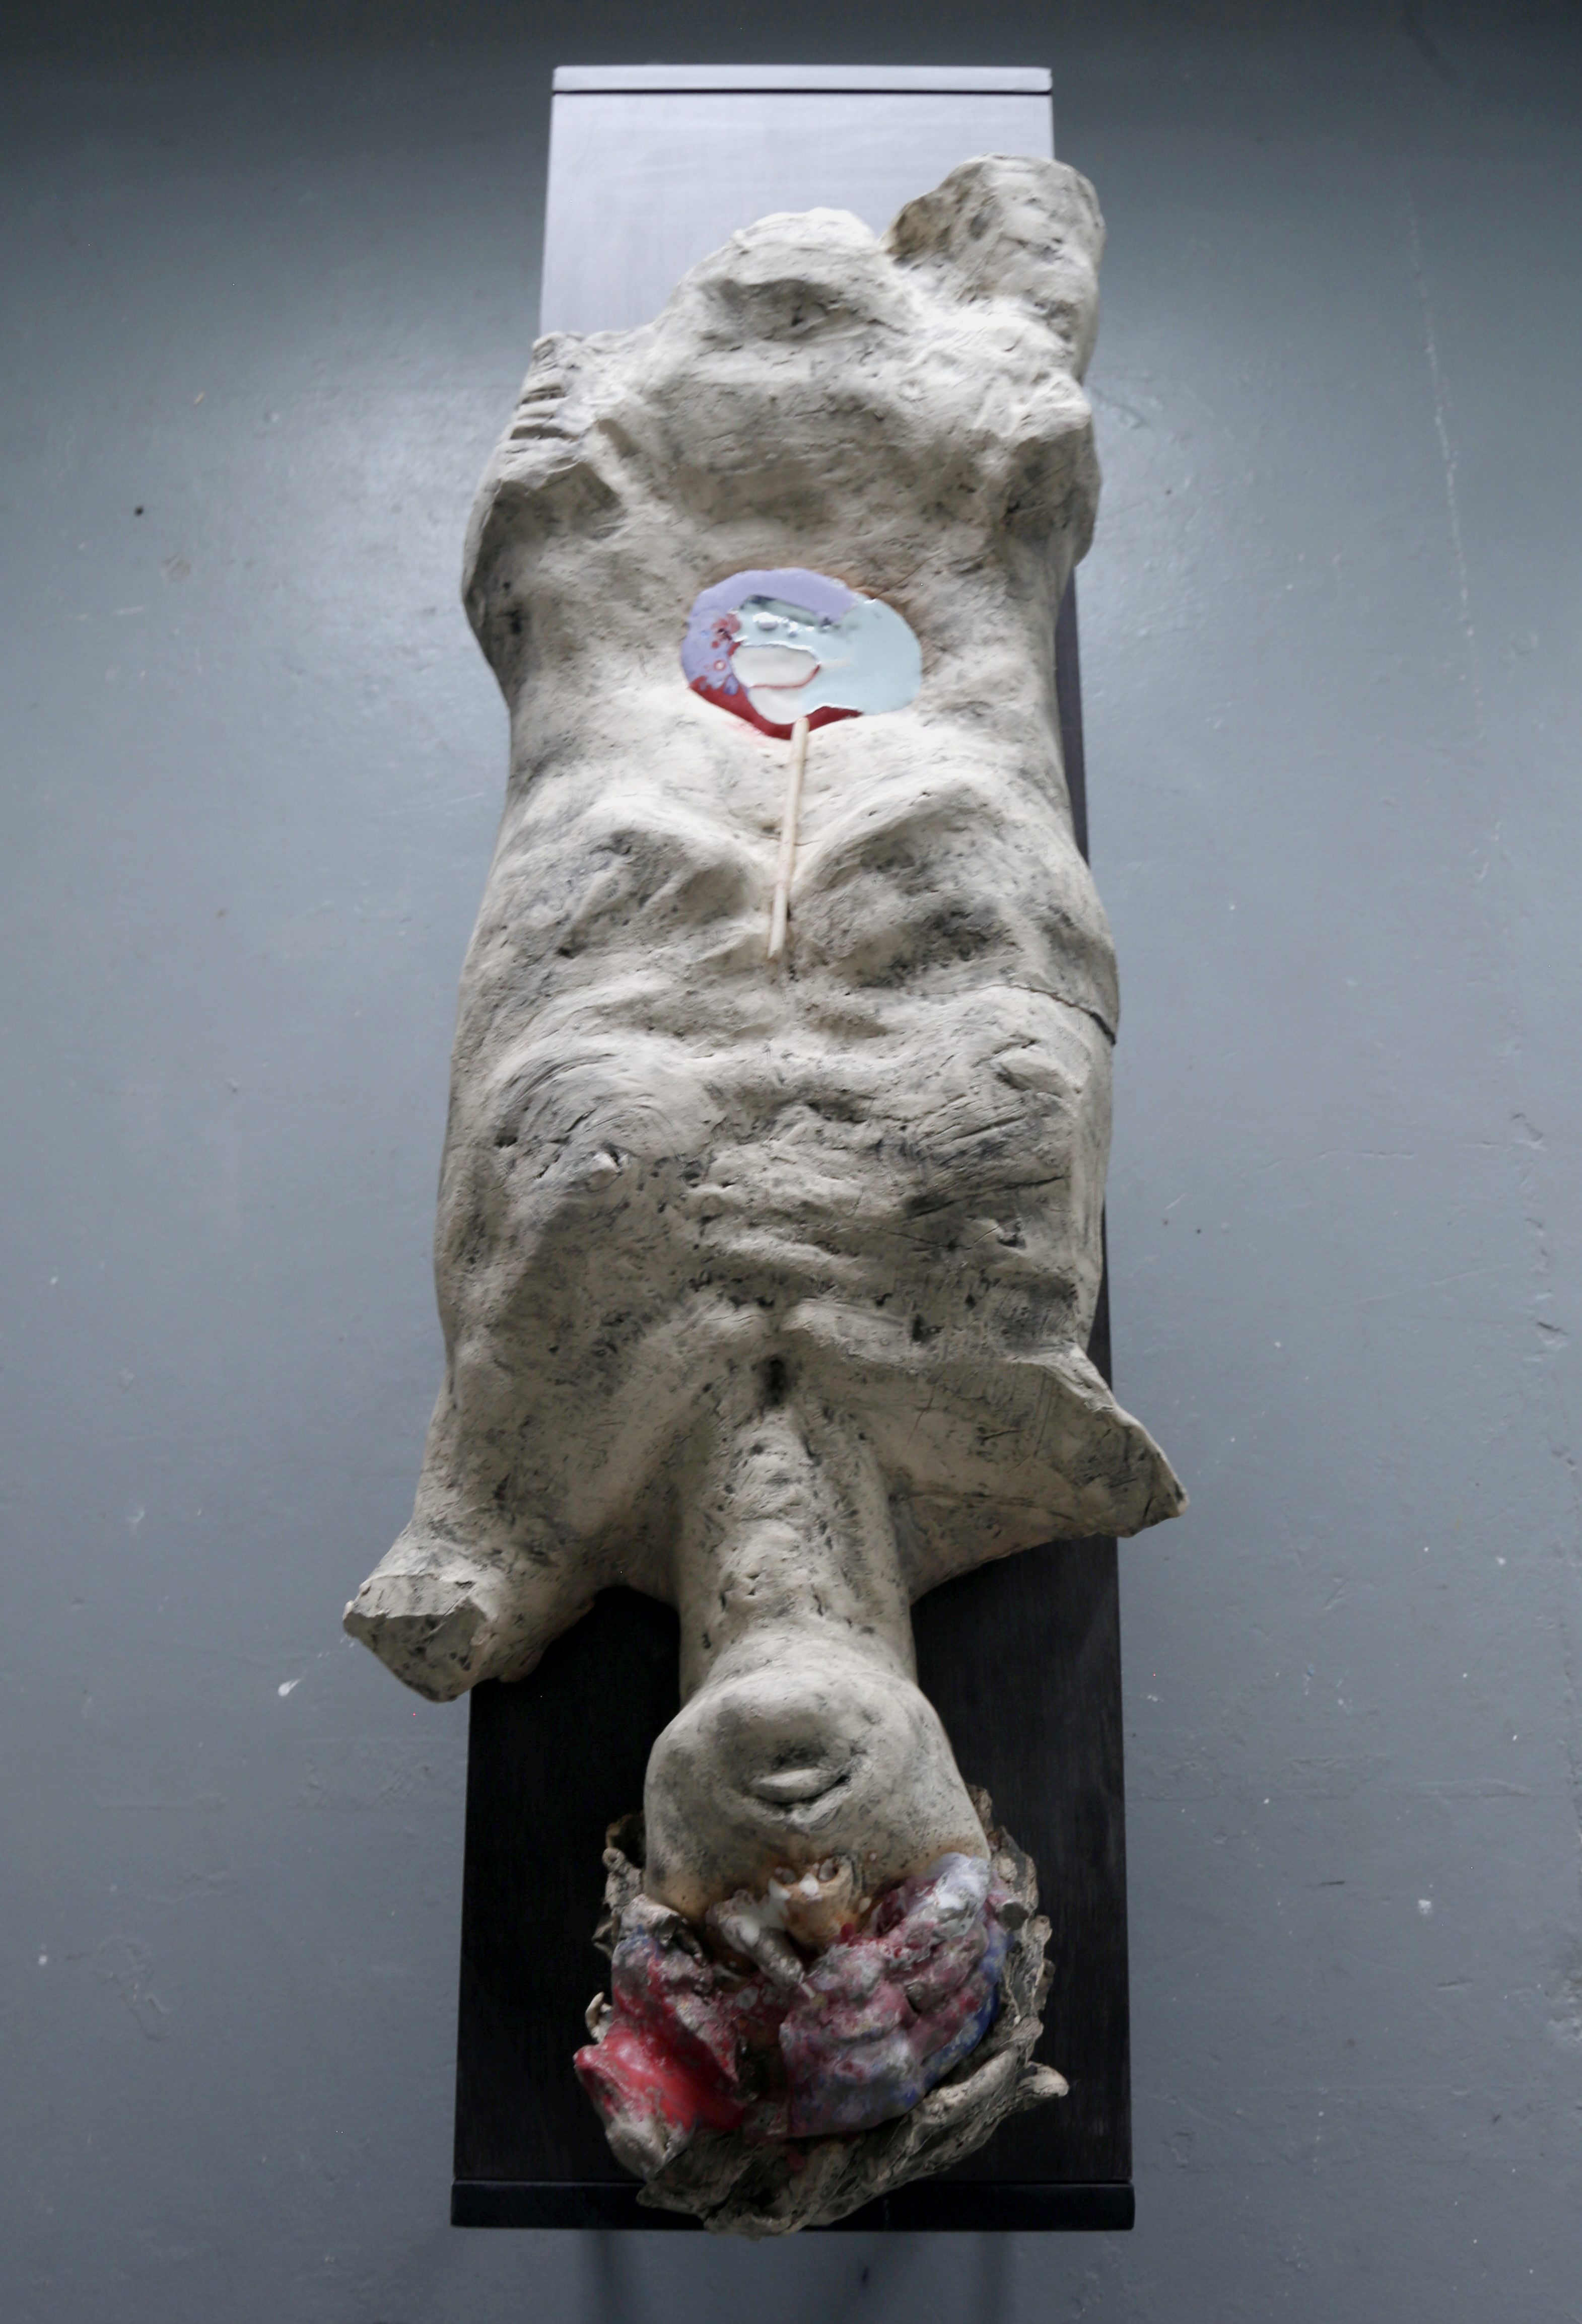 a sculpture of a man lying on a black surface